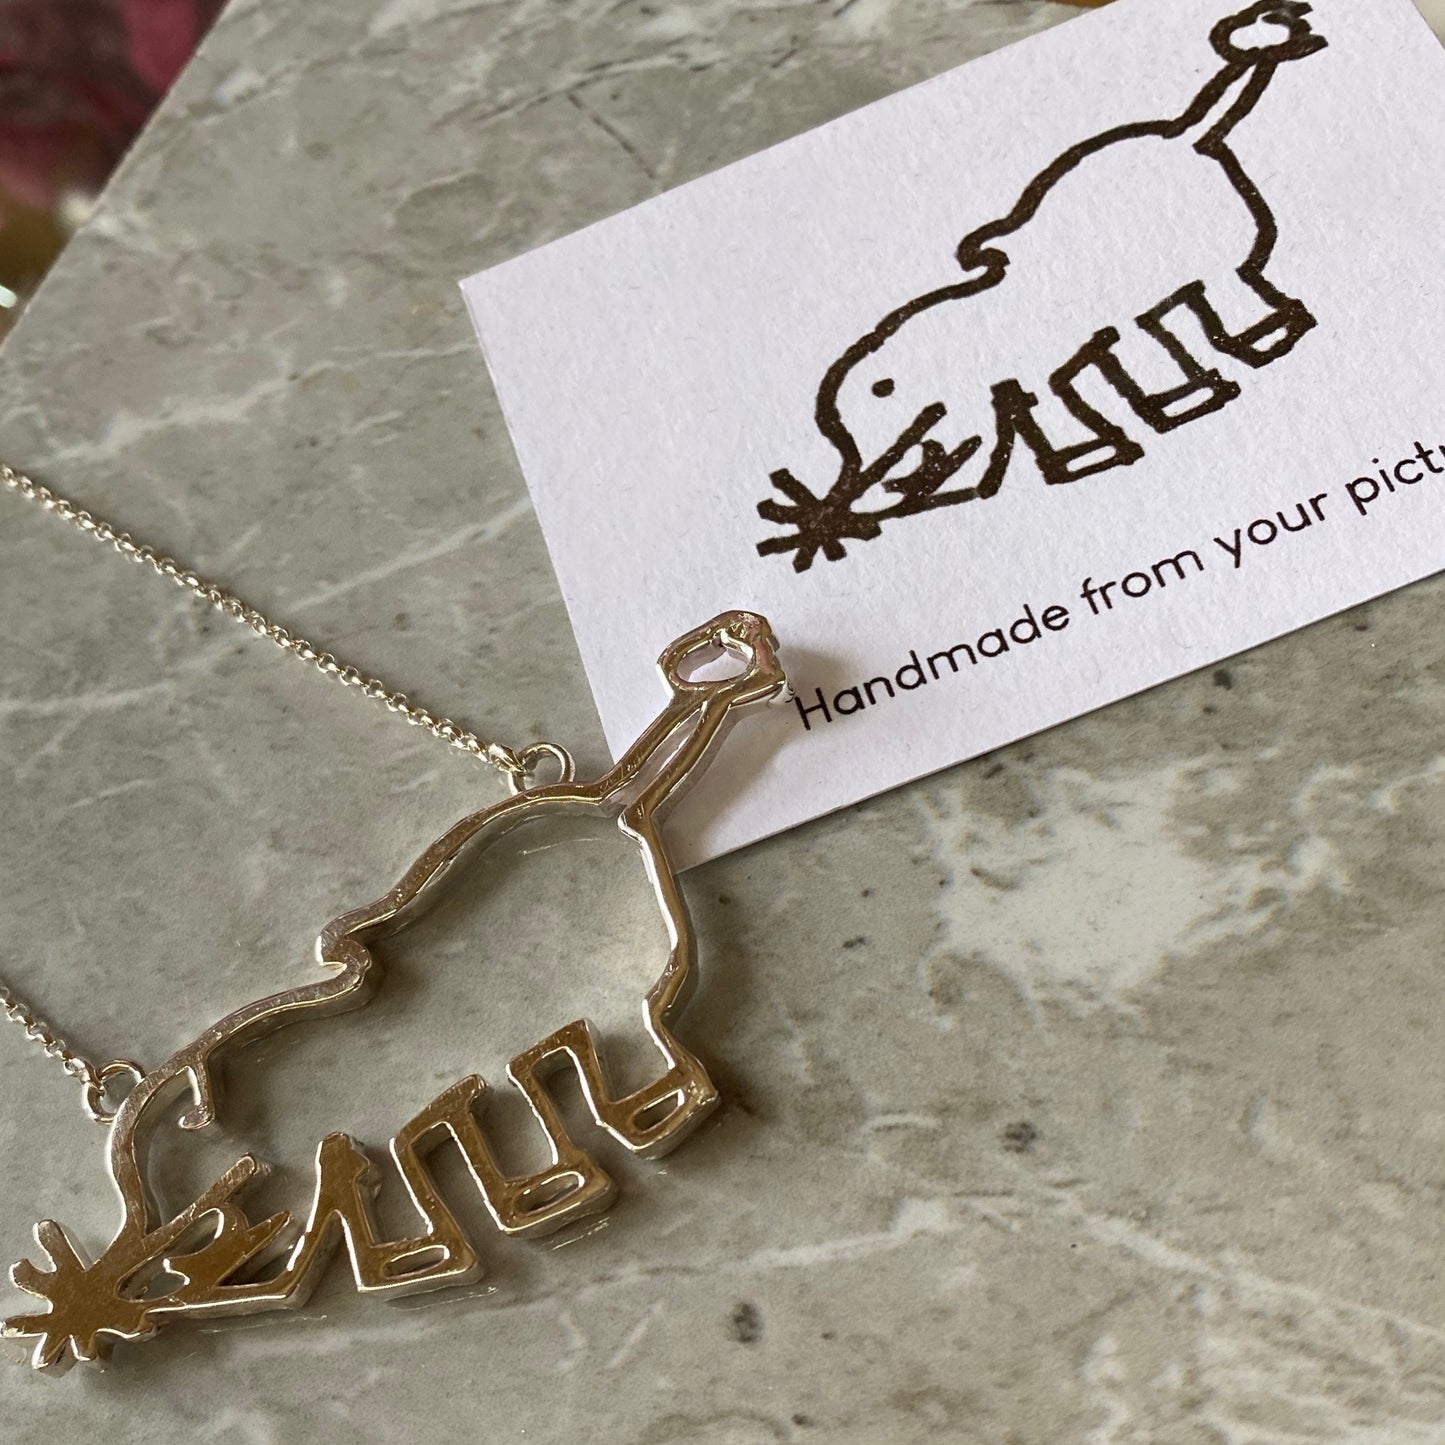 Solid silver doodle or child's drawing necklace